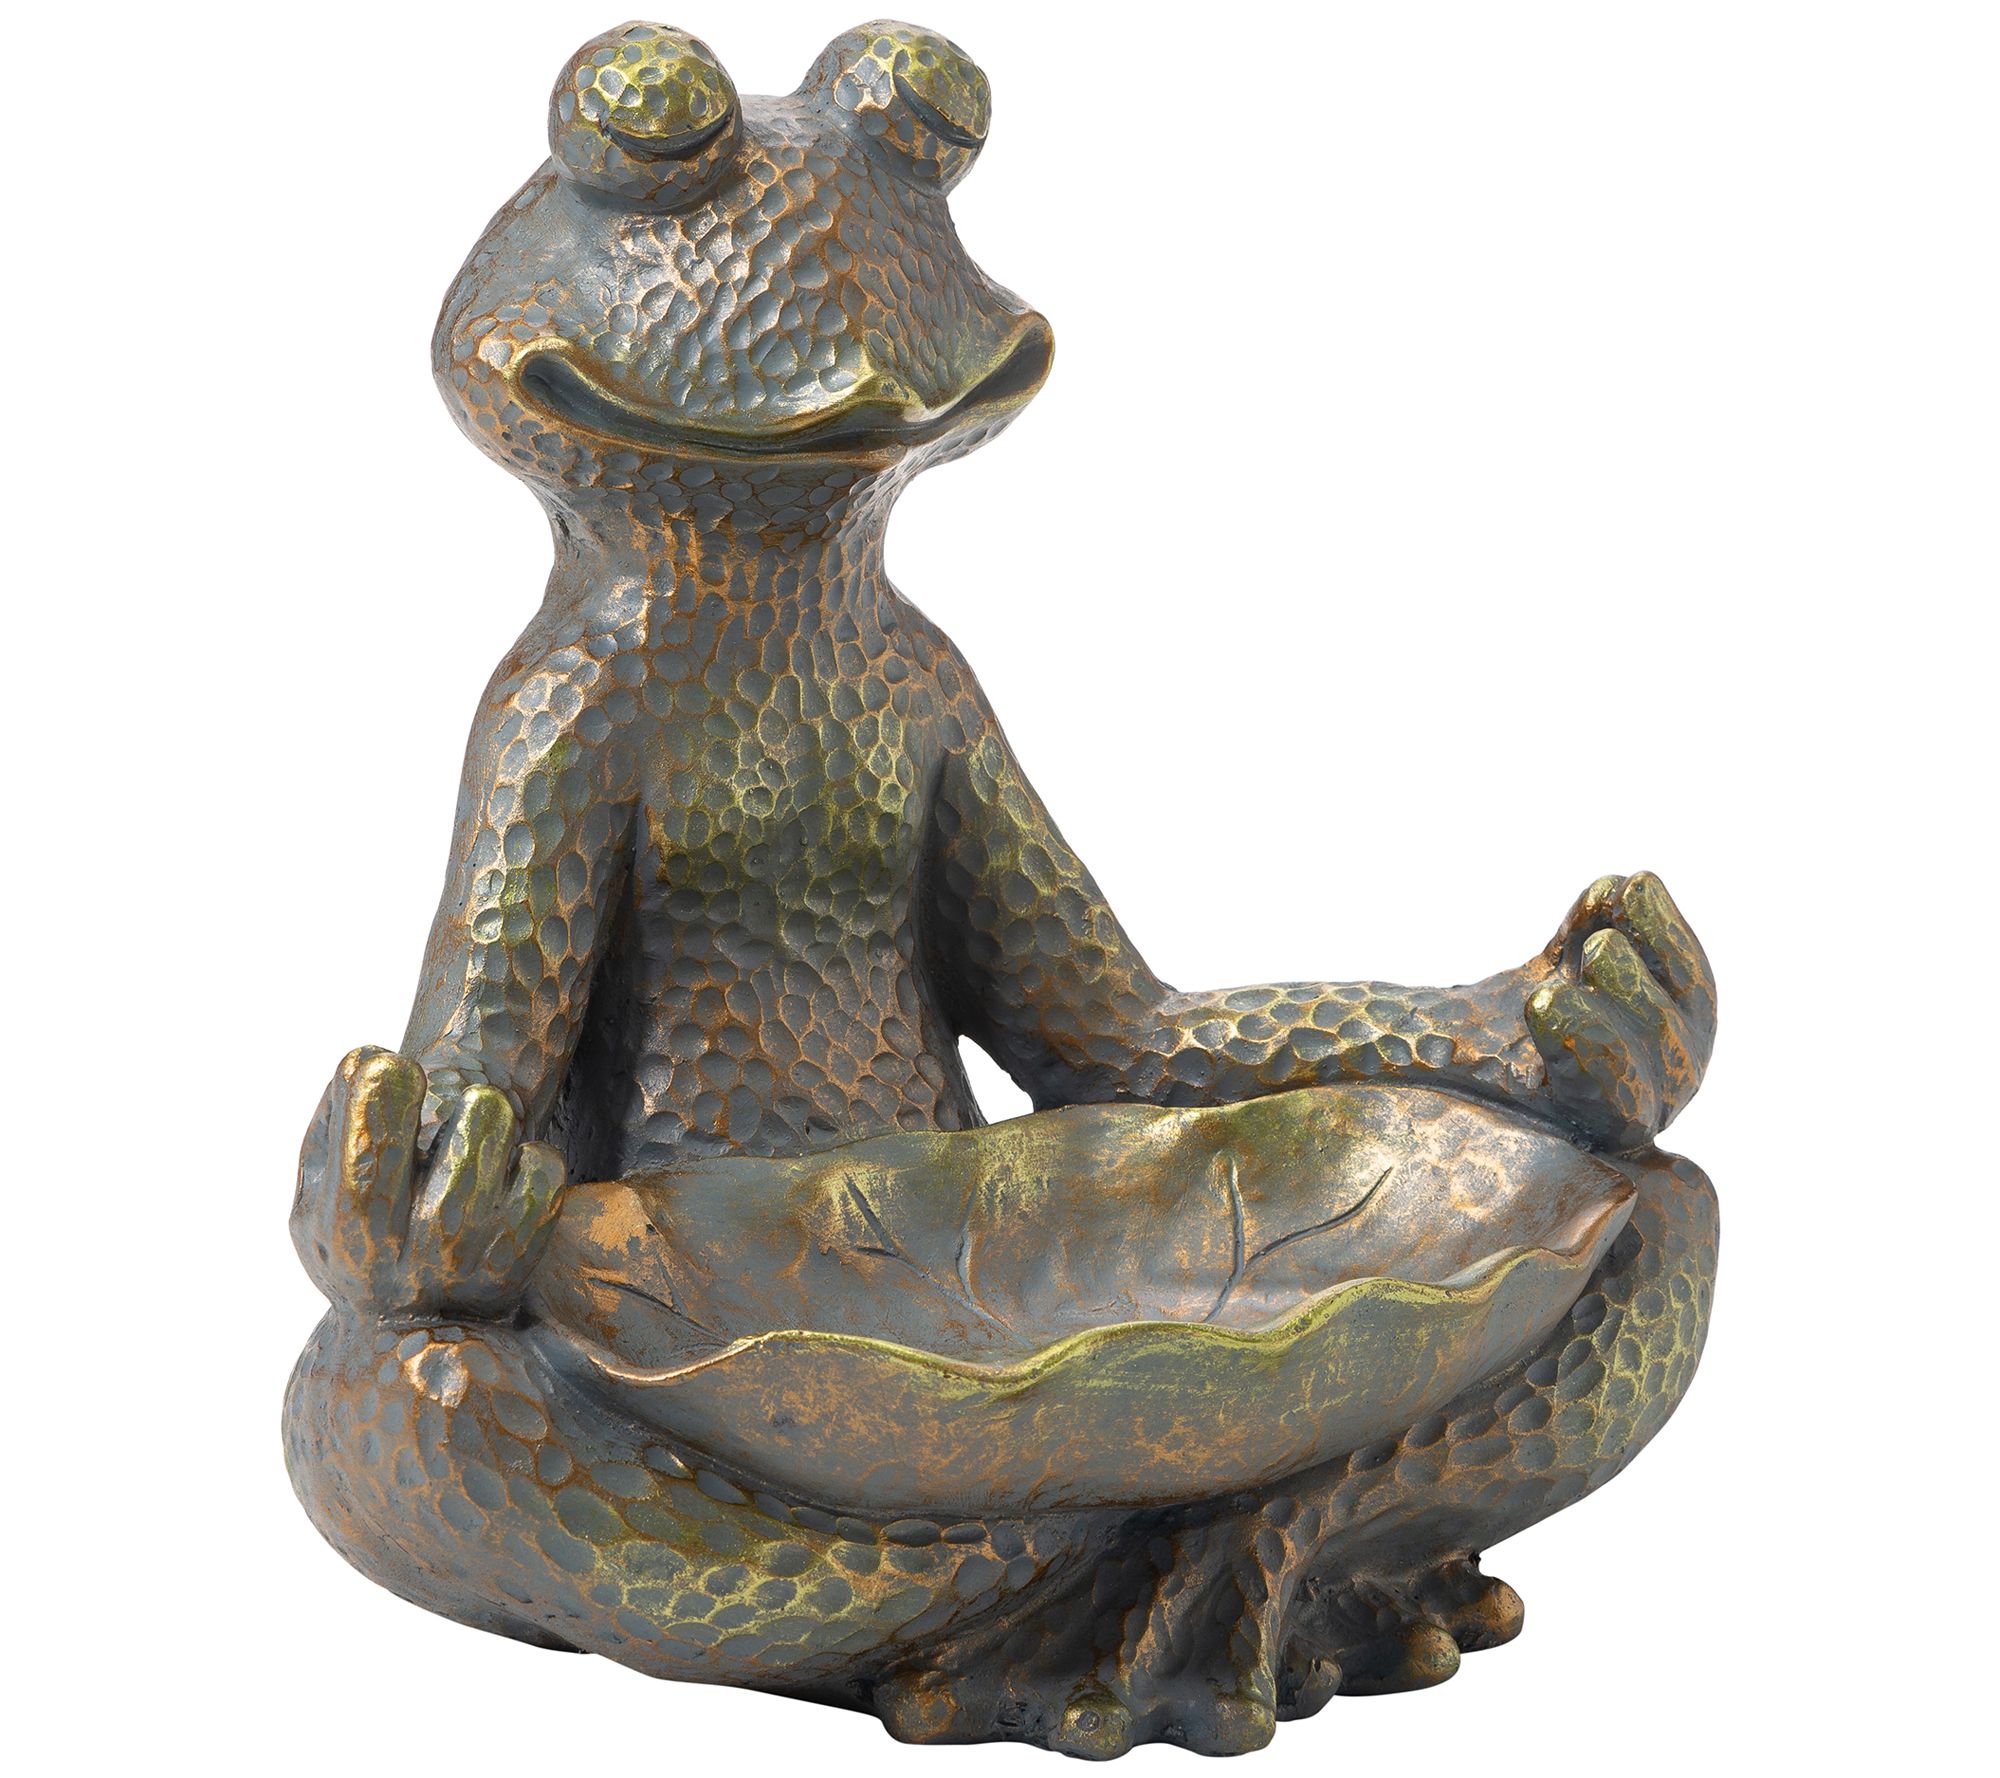 NEW 5" Blue Yoga on Lotus Froggie Frog Figurine Gift Eastern Lily Pad 1294 